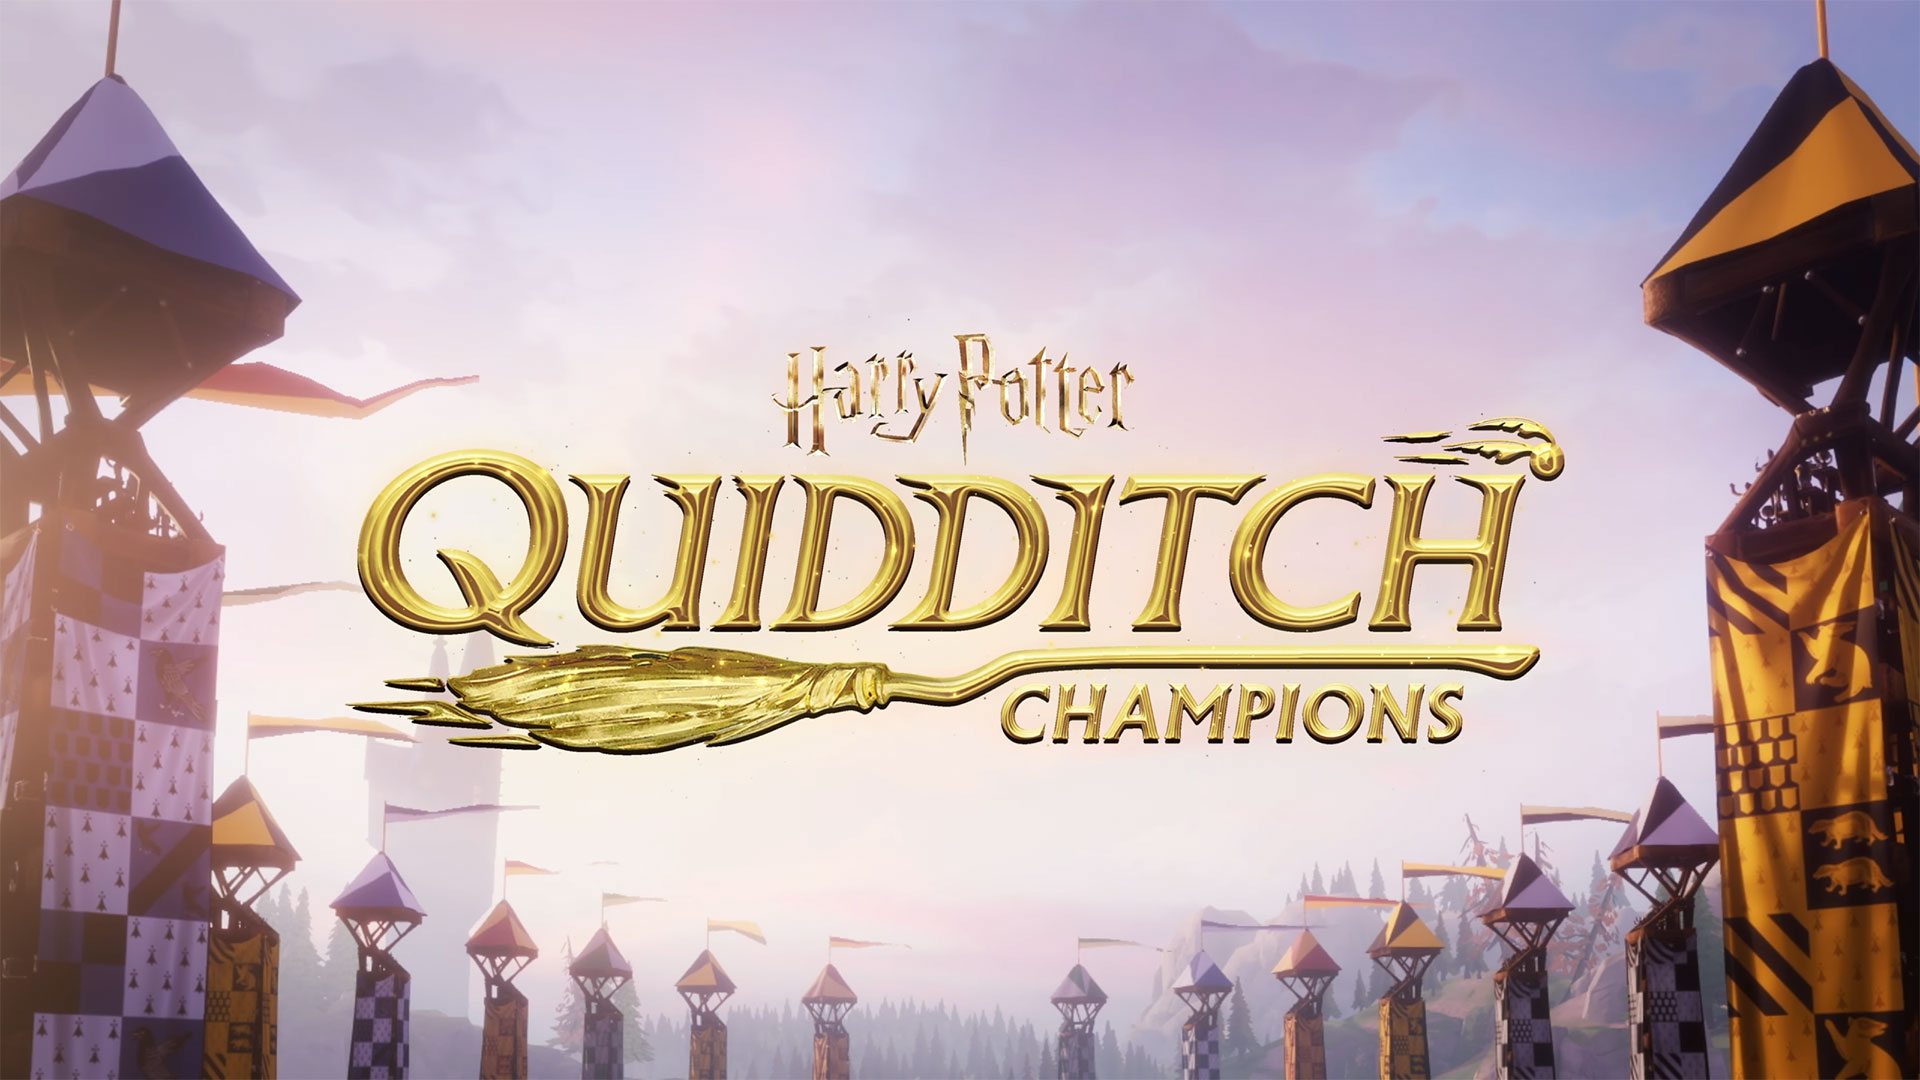 Harry Potter: Quidditch Champions finally has a release date